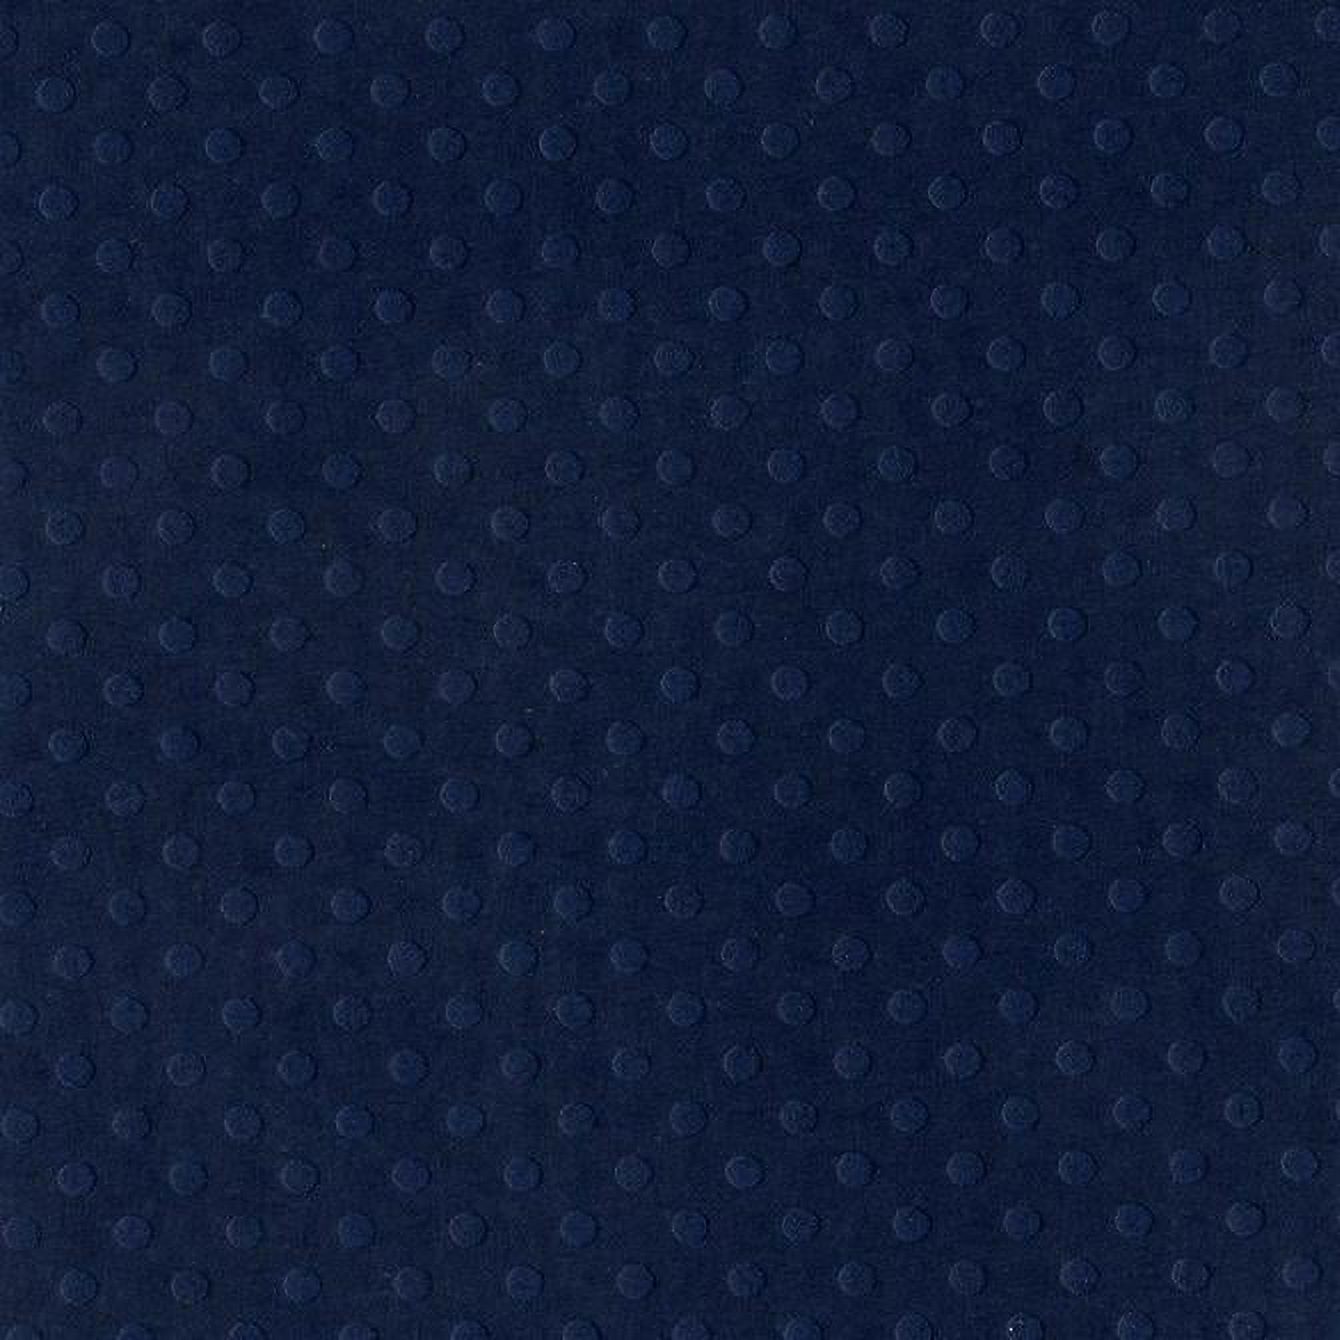 DEEP BLUE - 12x12 Dotted Swiss Embossed Cardstock by Bazzill for Premium Paper Crafts - 25 Pack - image 1 of 3